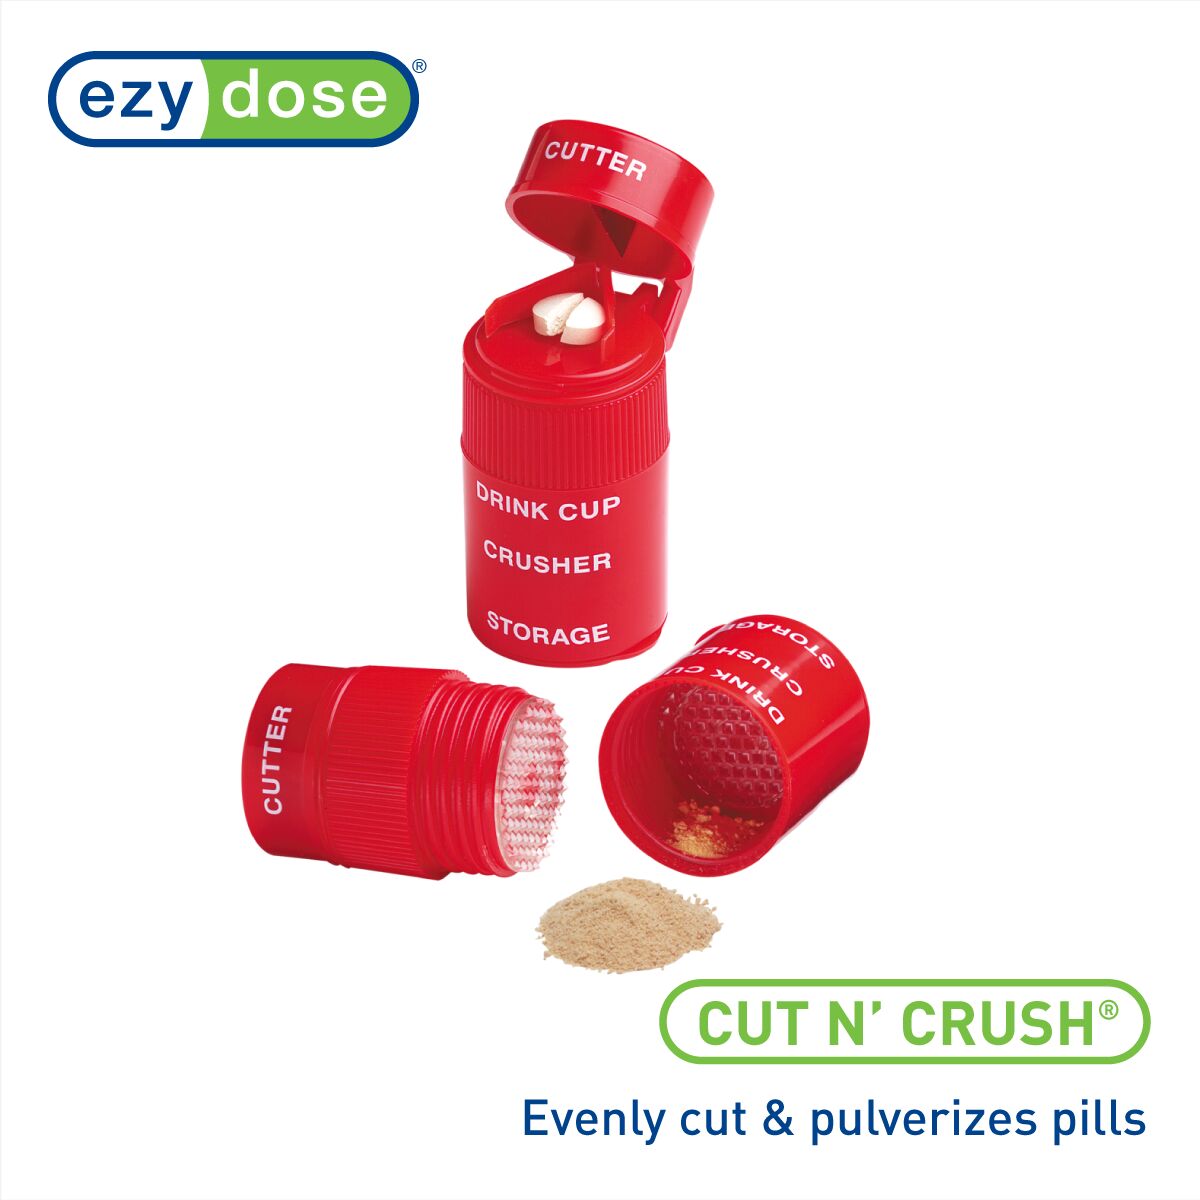 Pill cutter and crusher evenly cuts and pulverizes pills